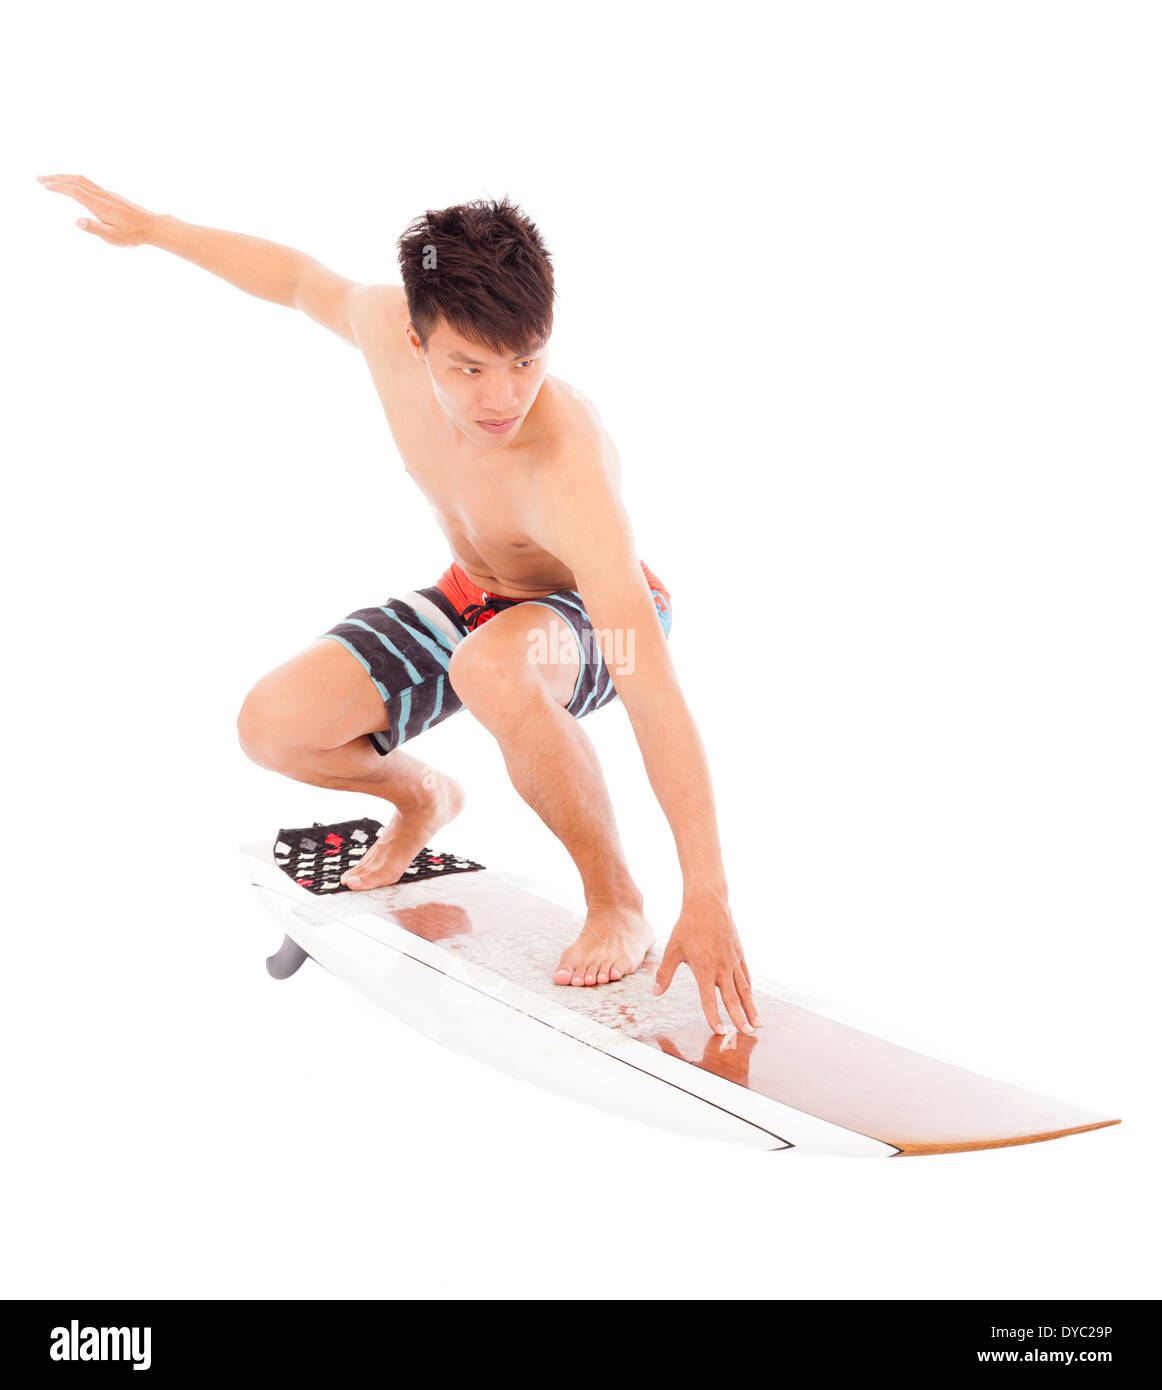 young  surfer practice surfing pose in studio Stock Photo